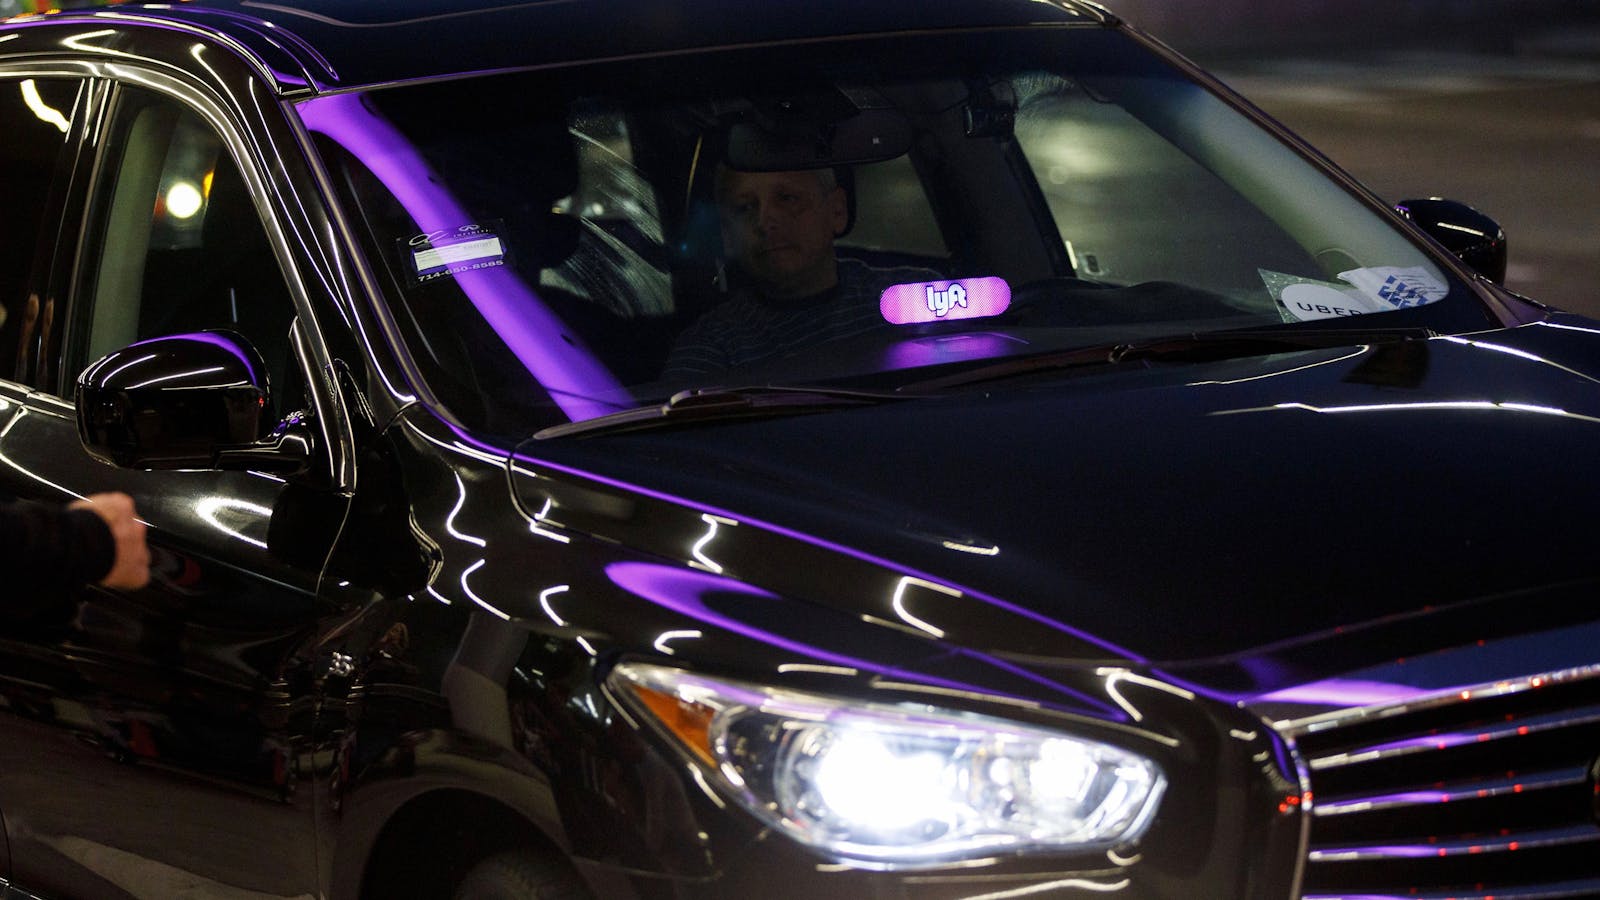 A Lyft car. Photo by Bloomberg.